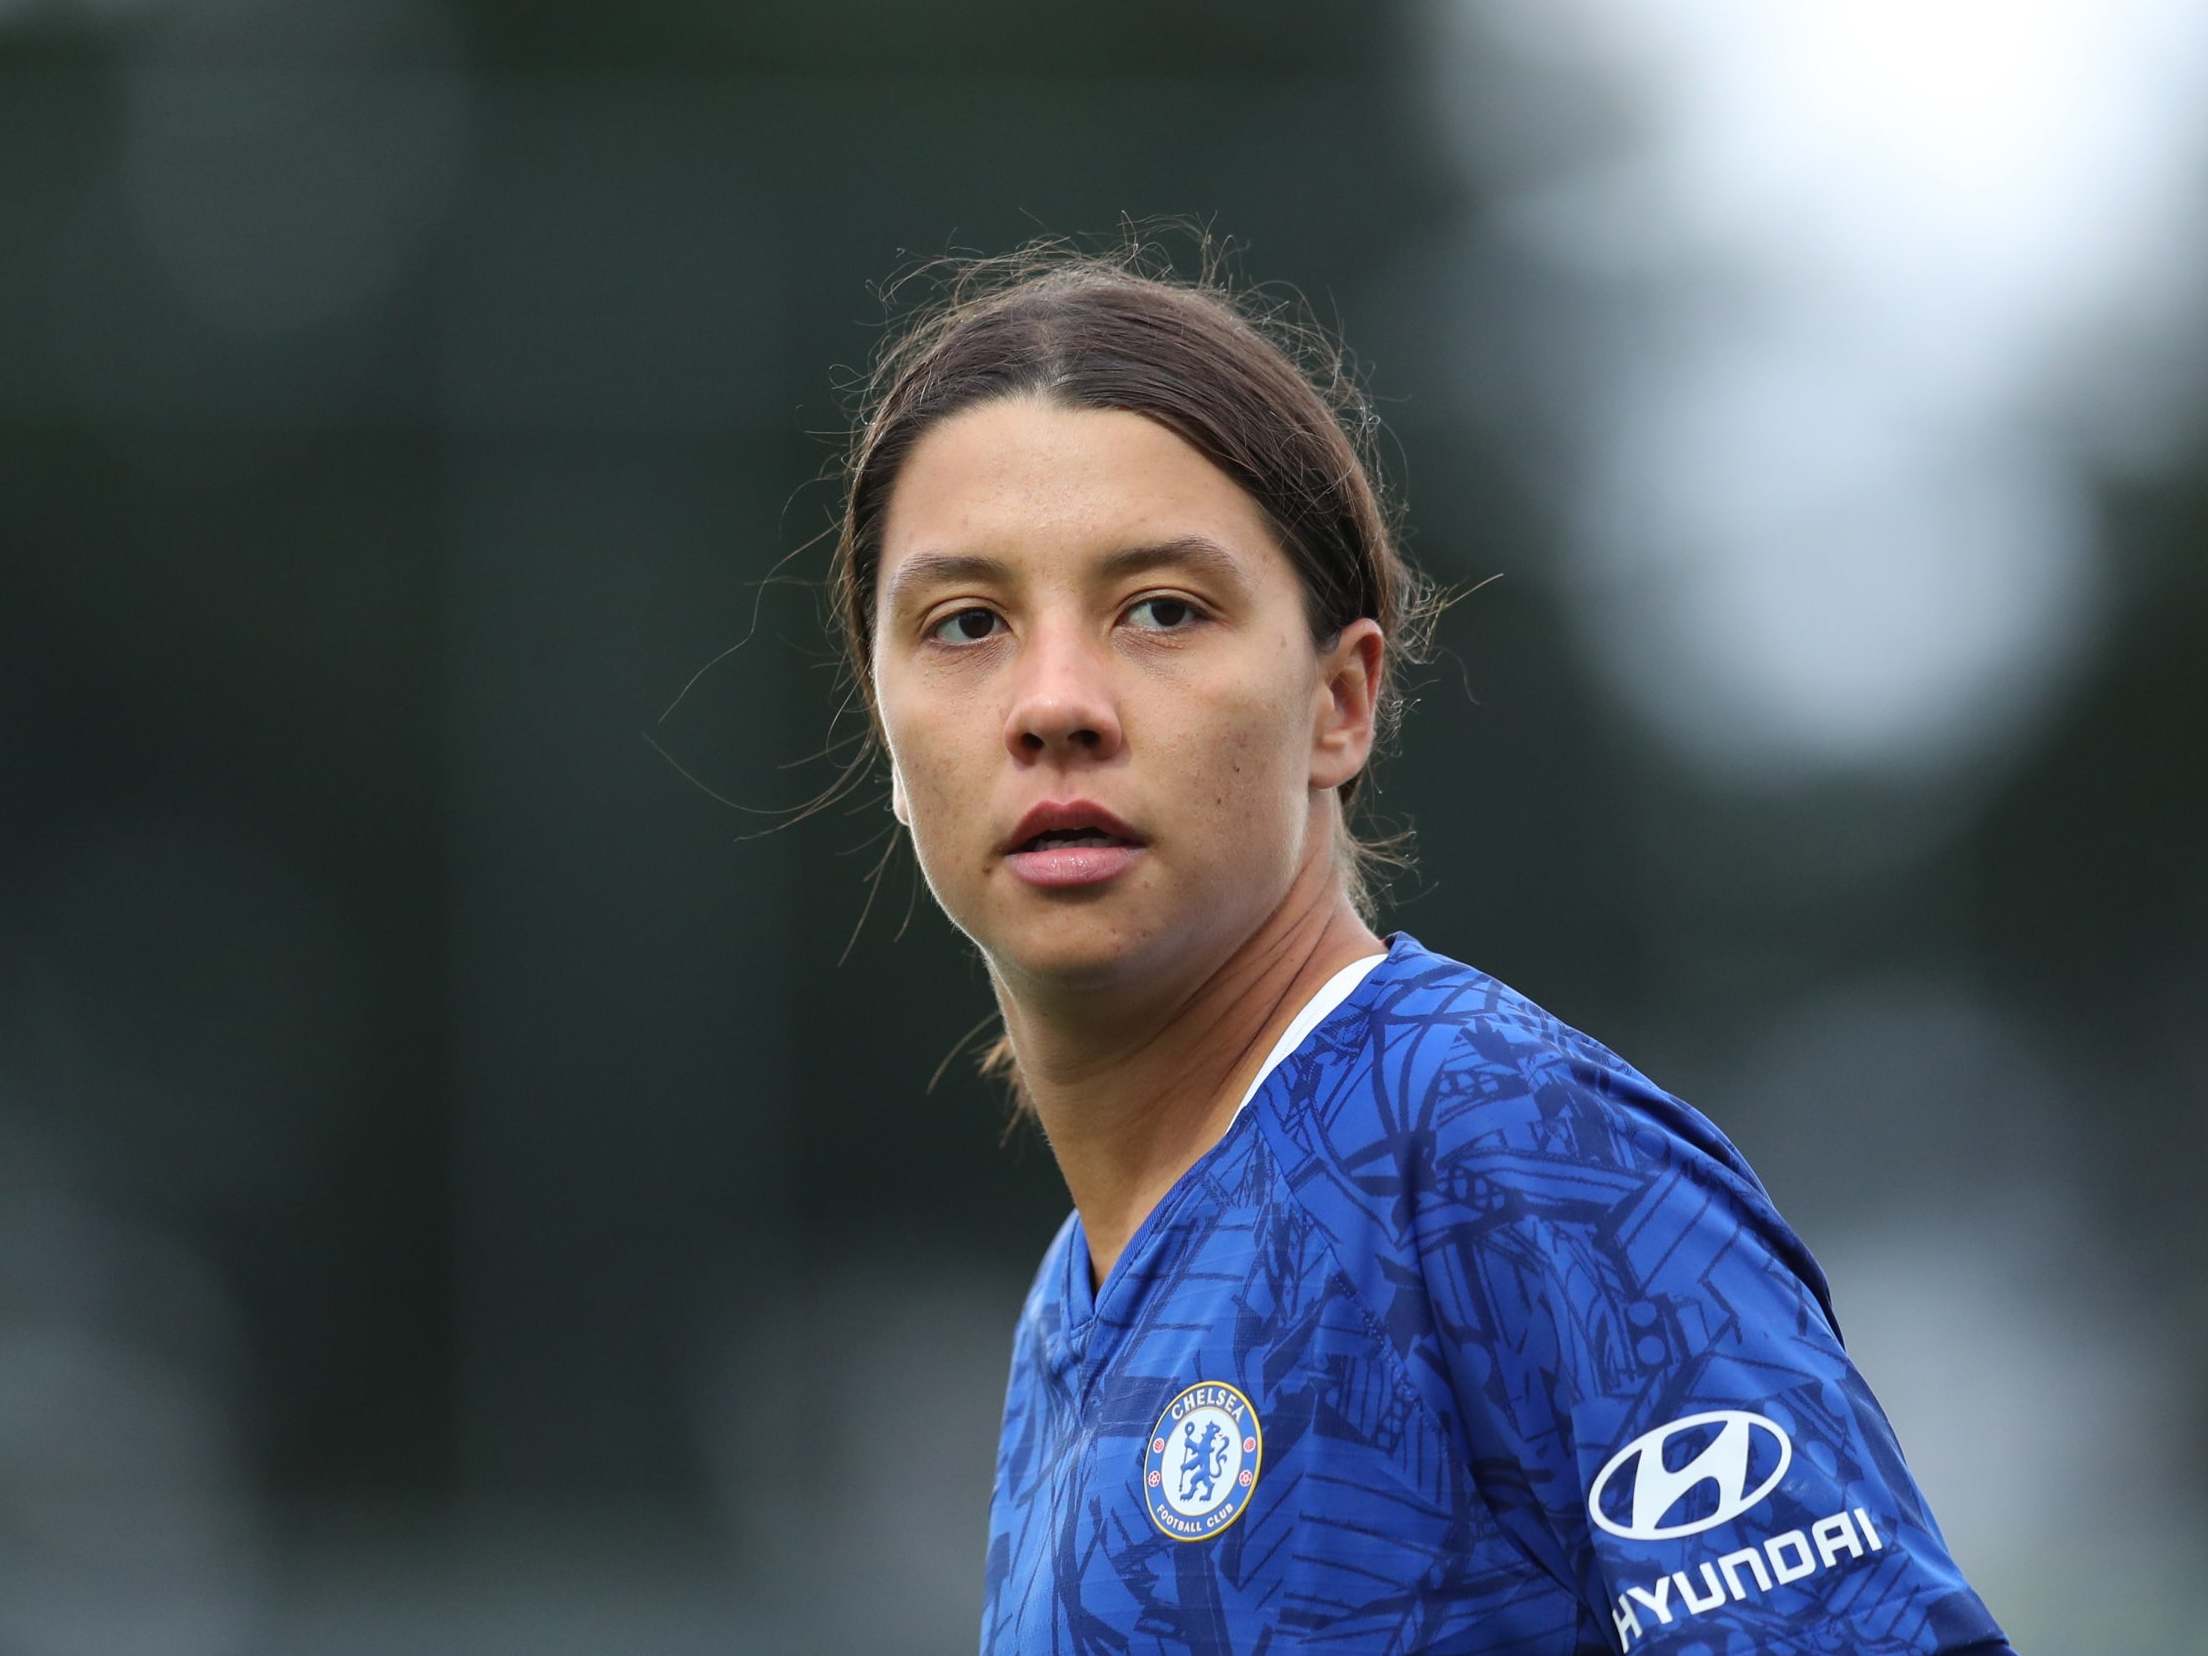 Sam Kerr showed flashes of brilliance on her Chelsea debut